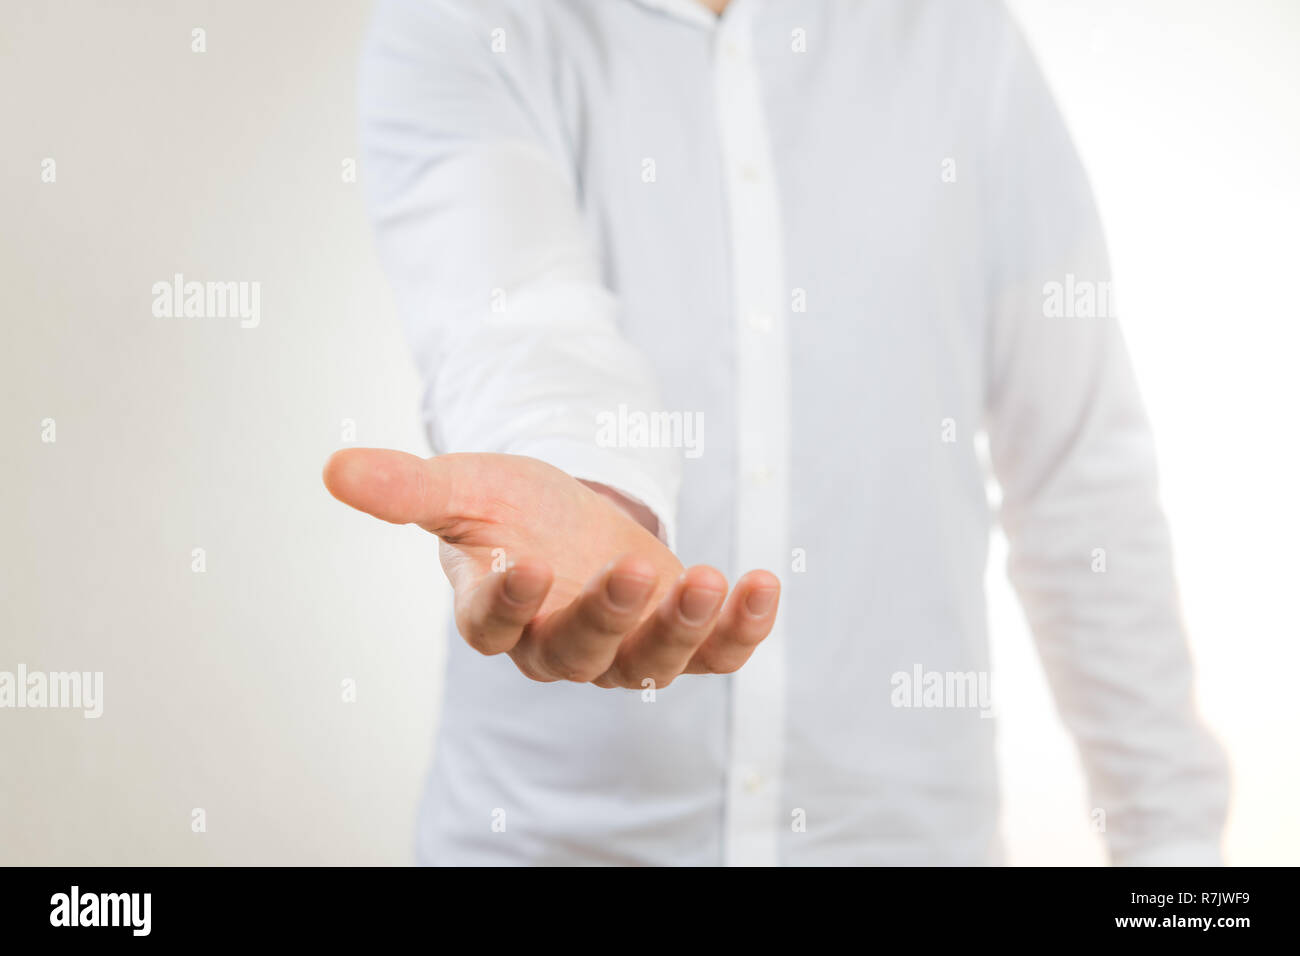 man with white shirt stretching out empty hand against white background Stock Photo